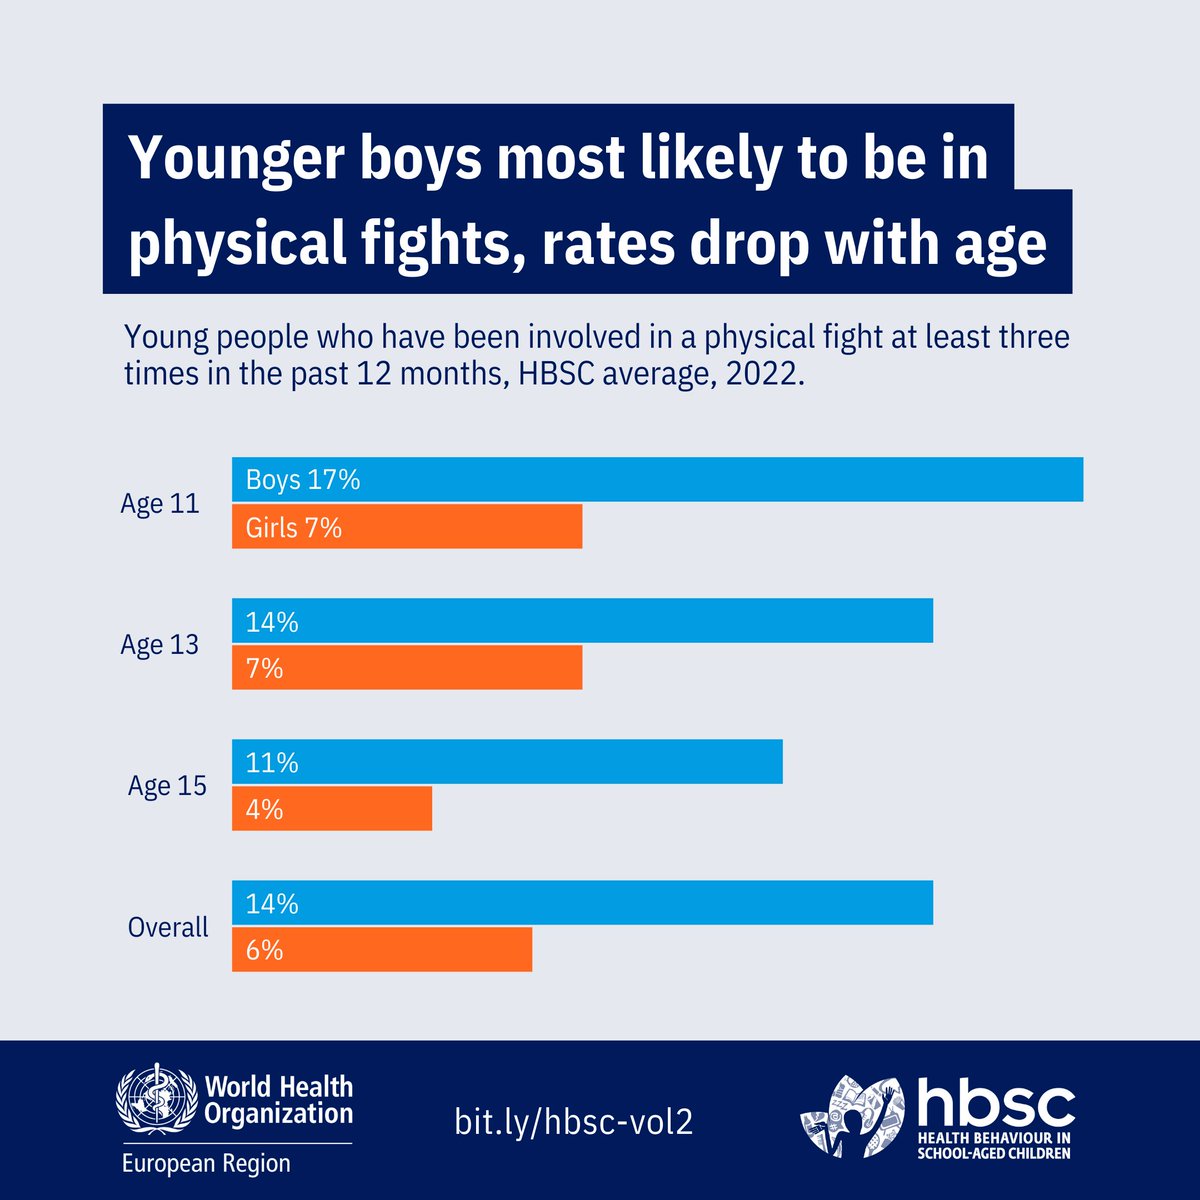 Overall, 14% of boys & 6% of girls report frequent involvement in physical fights. Rates are highest among younger groups & decline with age. Let's intervene early & promote peaceful conflict resolution skills. #AdolescentHealth bit.ly/hbsc-vol2